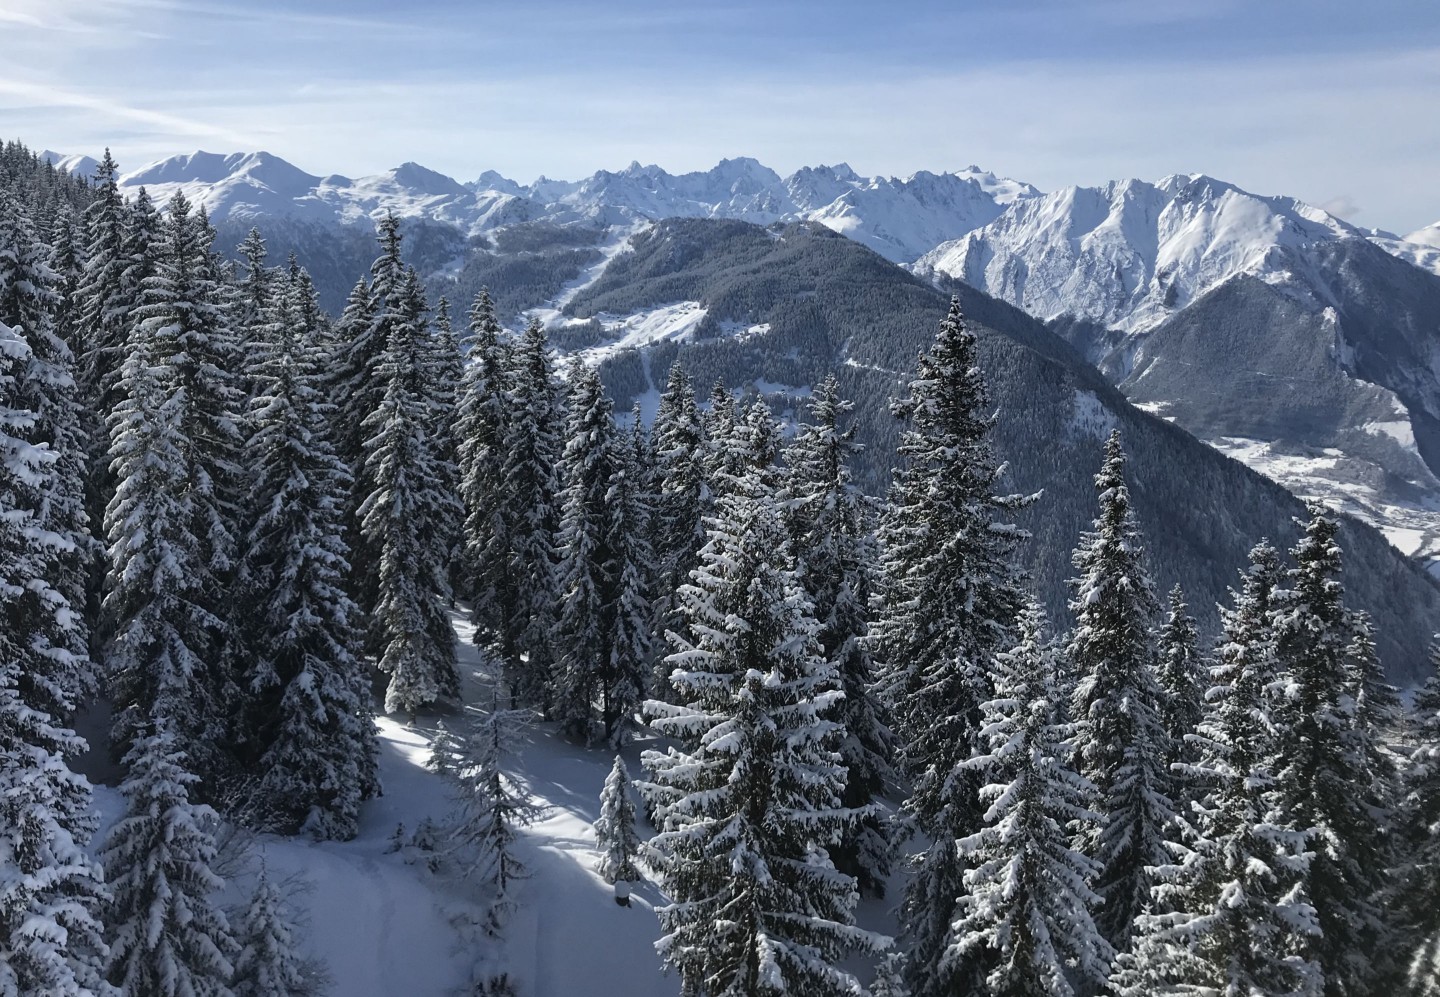 What’s New in Verbier for 2019/20